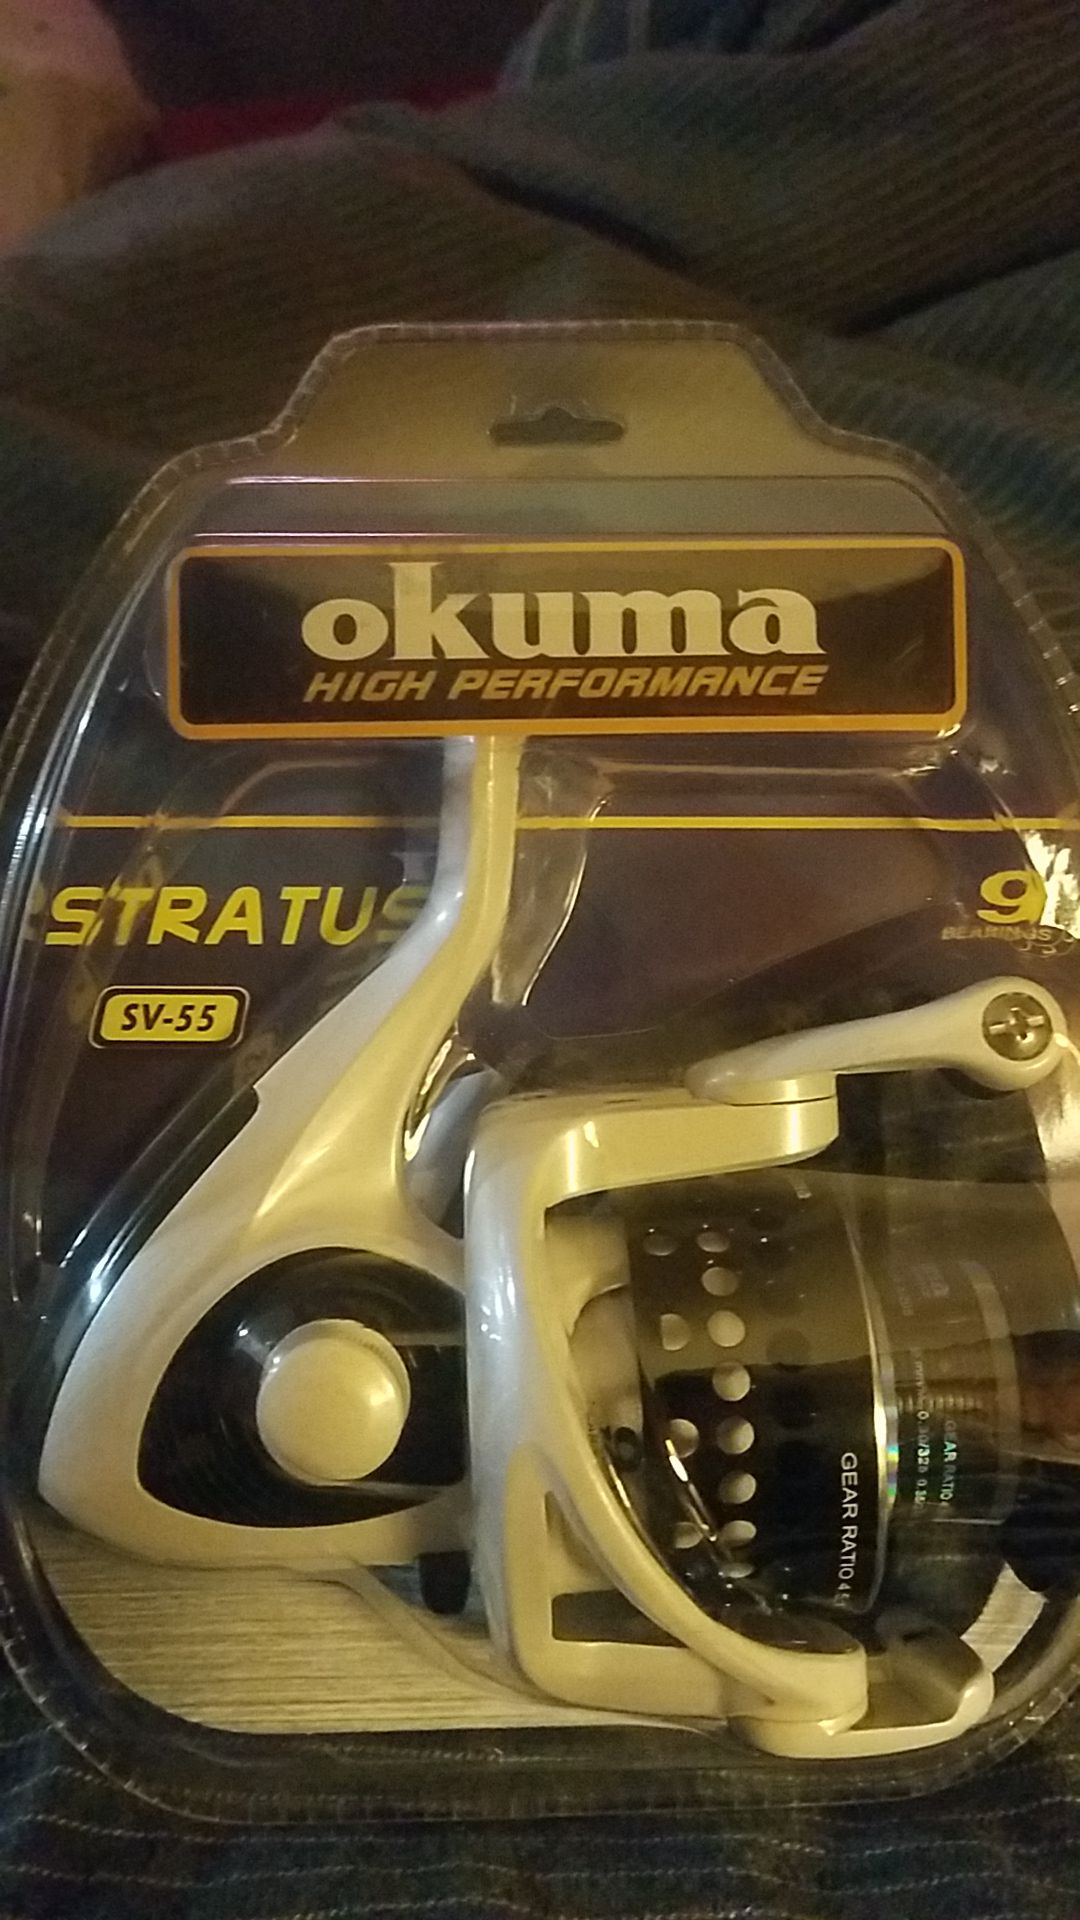 Okuma stratus sv55 reel for Sale in Puyallup, WA - OfferUp